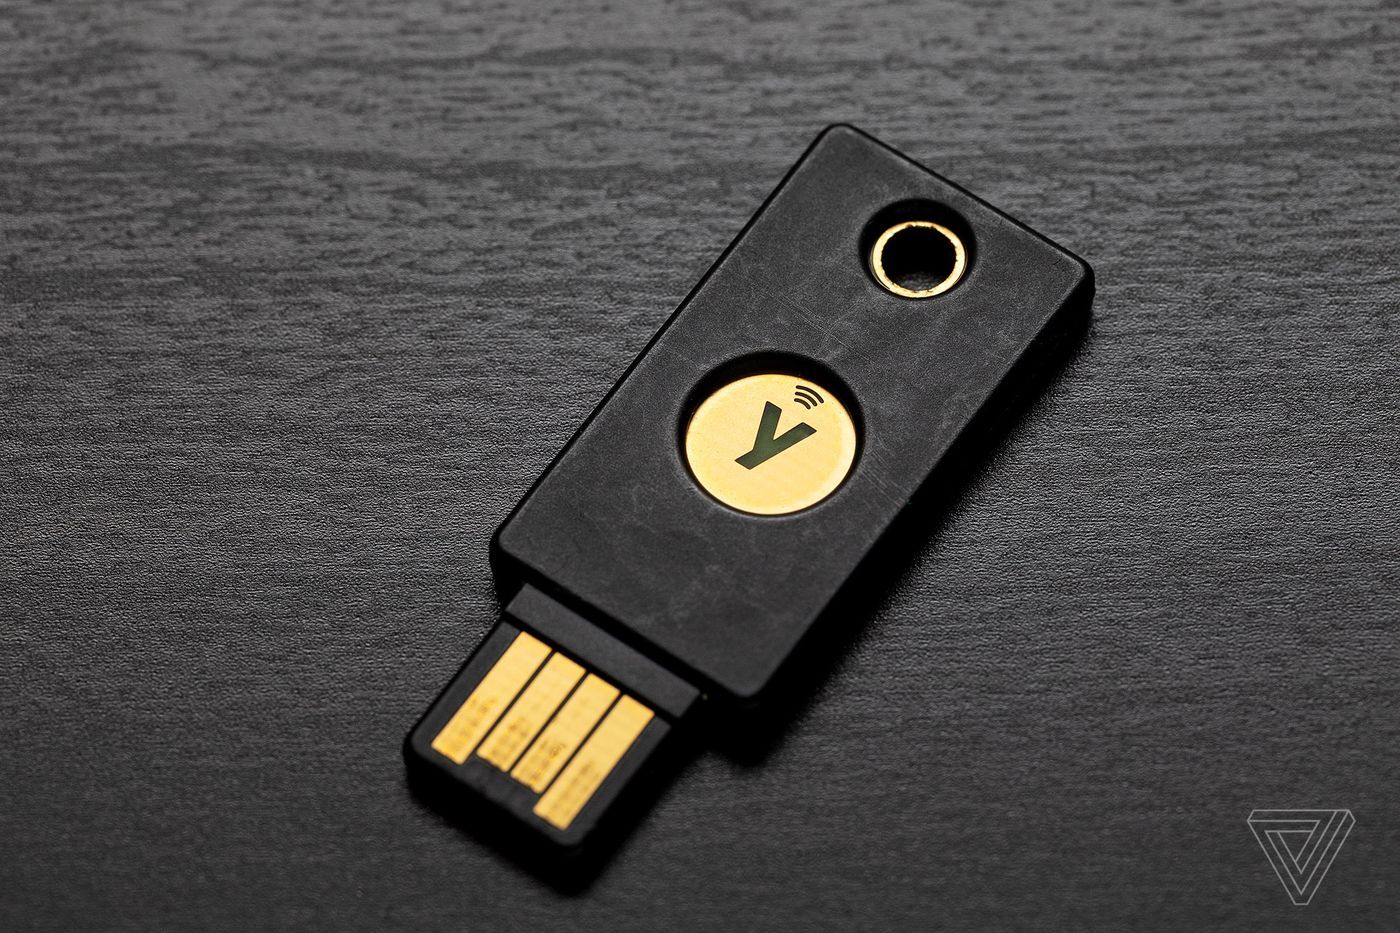 Yubico 5 NFC Security Key, available in Micro Center - You can now use a physical security key to log into Facebook on Android and iOS